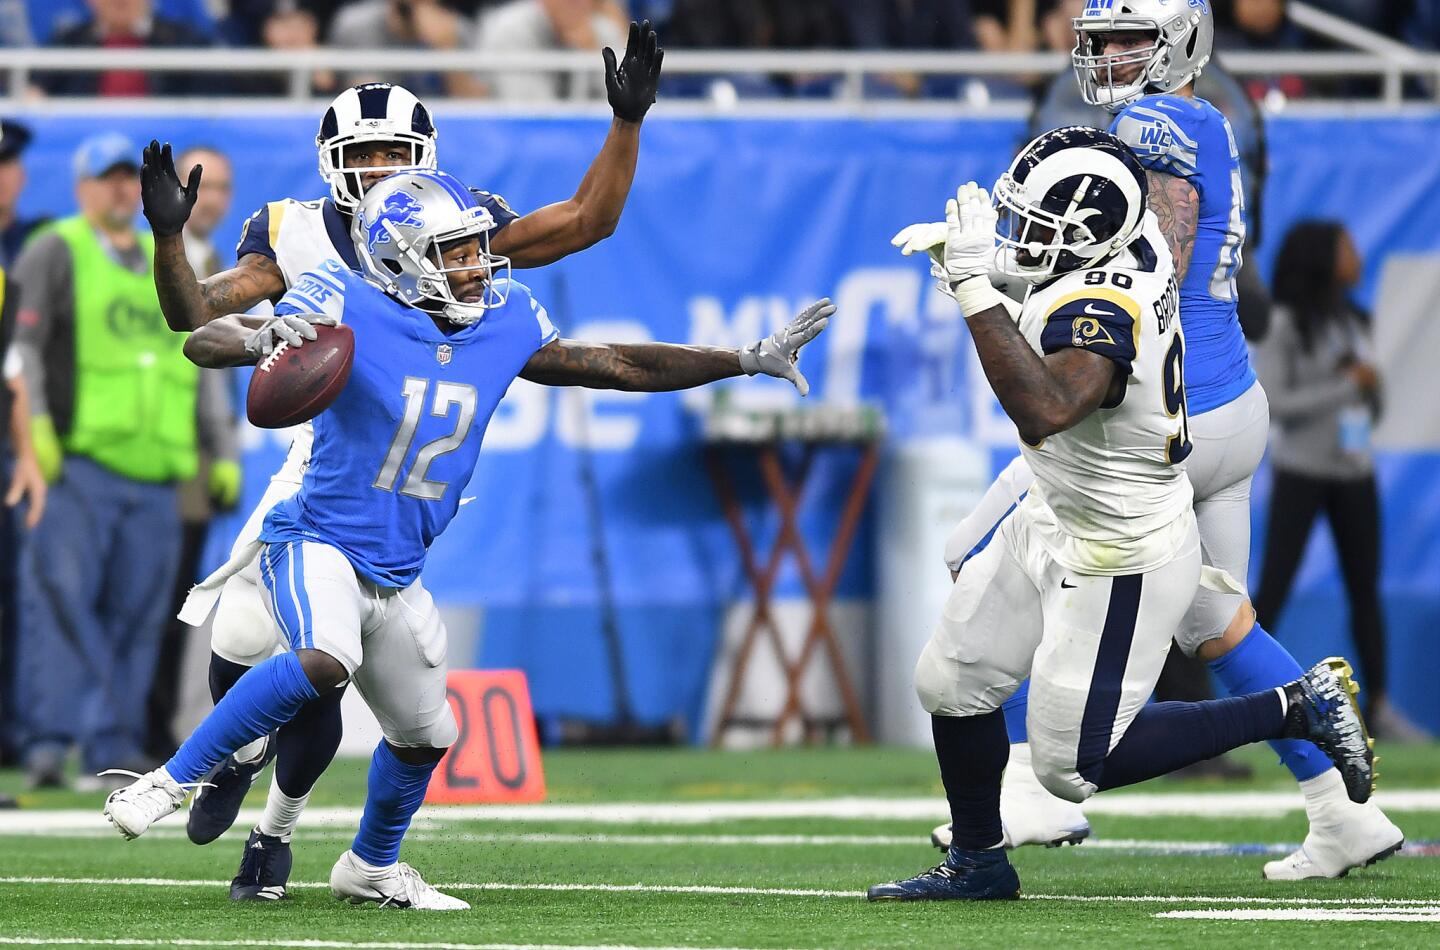 Detroit Lions receiver Bruce Ellington tries to throw a pass but is swarmed by Rams' Marcus Peters, left, and Michael Brockers and forced into an incomplete pass in the third quarter at Ford Field in Detroit on Sunday.